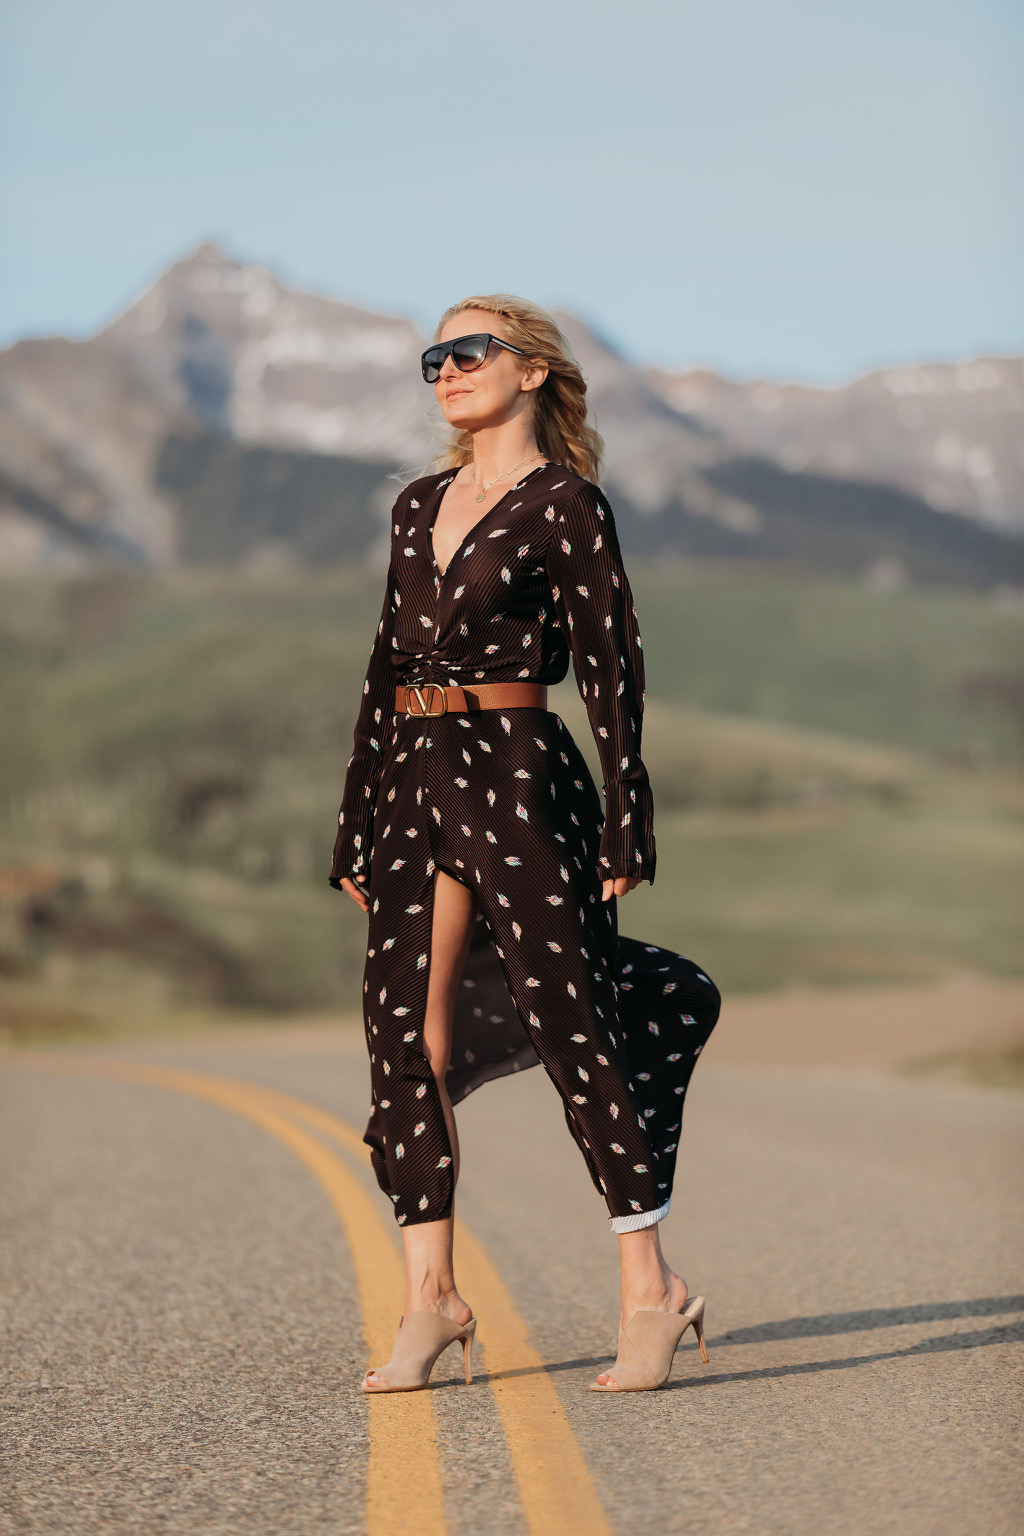 Black dress, fashion blogger Erin Busbee of Busbee Style wearing a black printed dress by Rotate with a Valentino belt, nude Vince Camuto mules, and flat top sunglasses in Telluride, Colorado